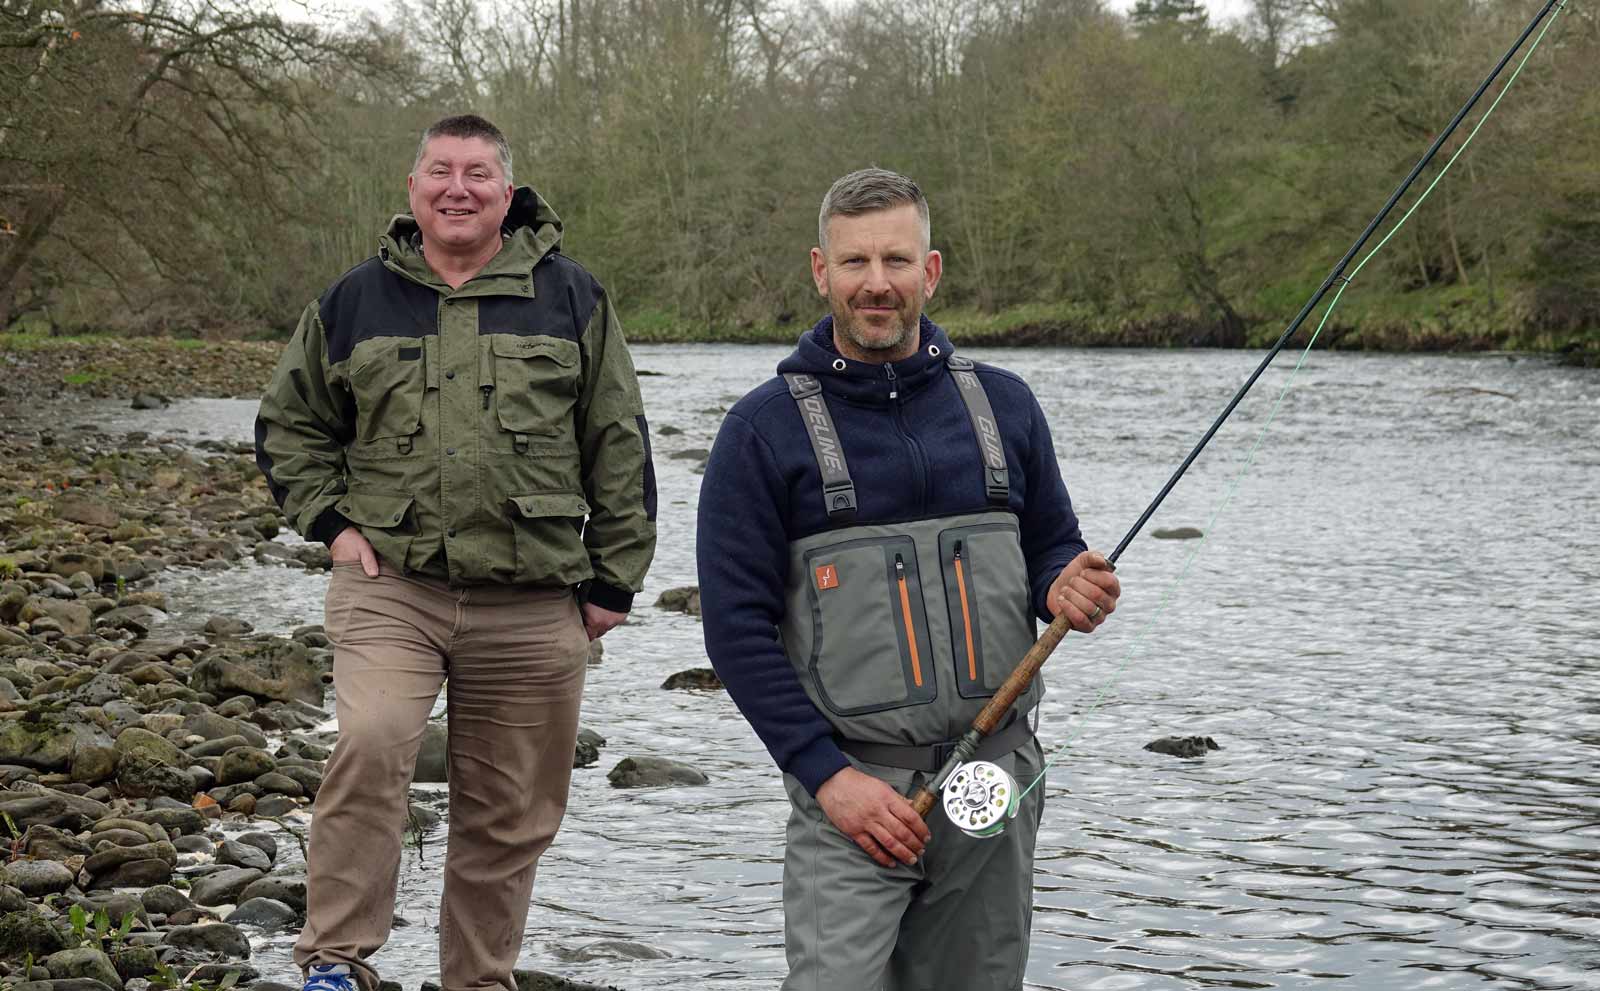 Game On! Yorkshire Game Fishing’s Philip Ellis, right, with sponsor Stephen Outhwaite from Outhwaite Associates